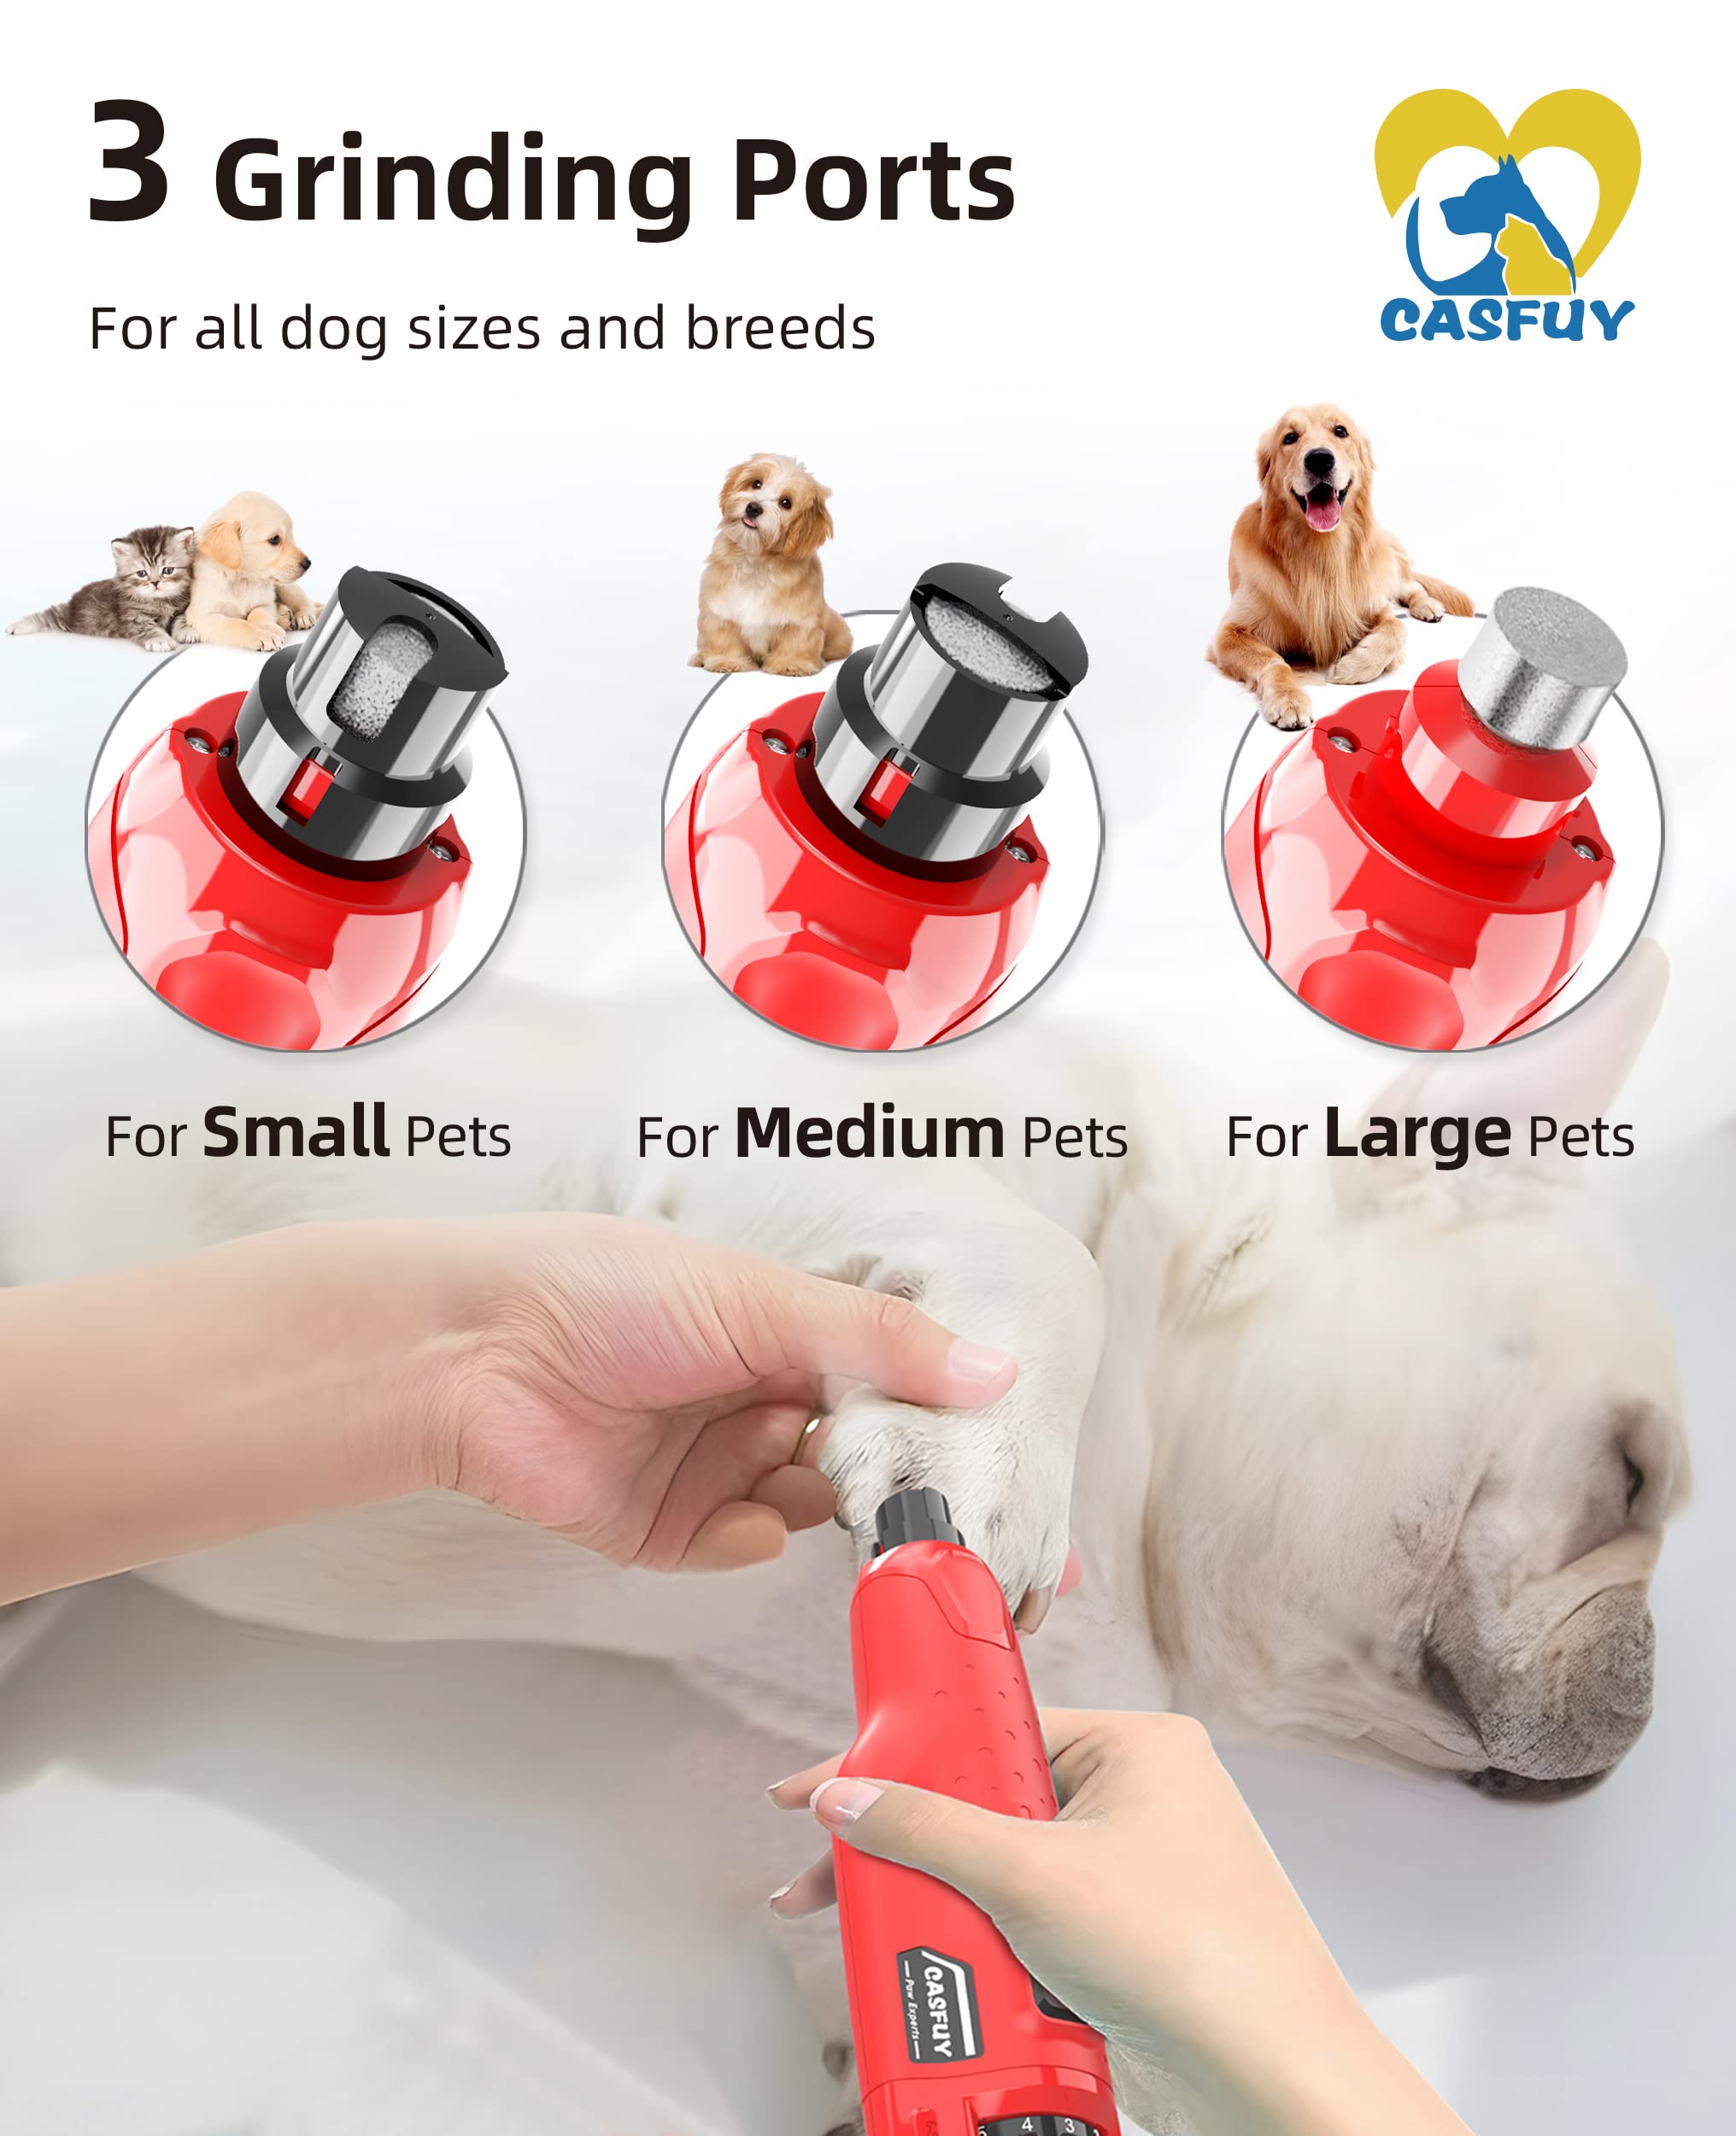 Casfuy Dog Nail Grinder Quiet - (45db) 6-Speed Pet Nail Grinder with 2 LED Lights for Large Medium Small Dogs/Cats, Professional 3 Ports Rechargeable Electric Dog Nail Trimmer with Dust Cap(Red)